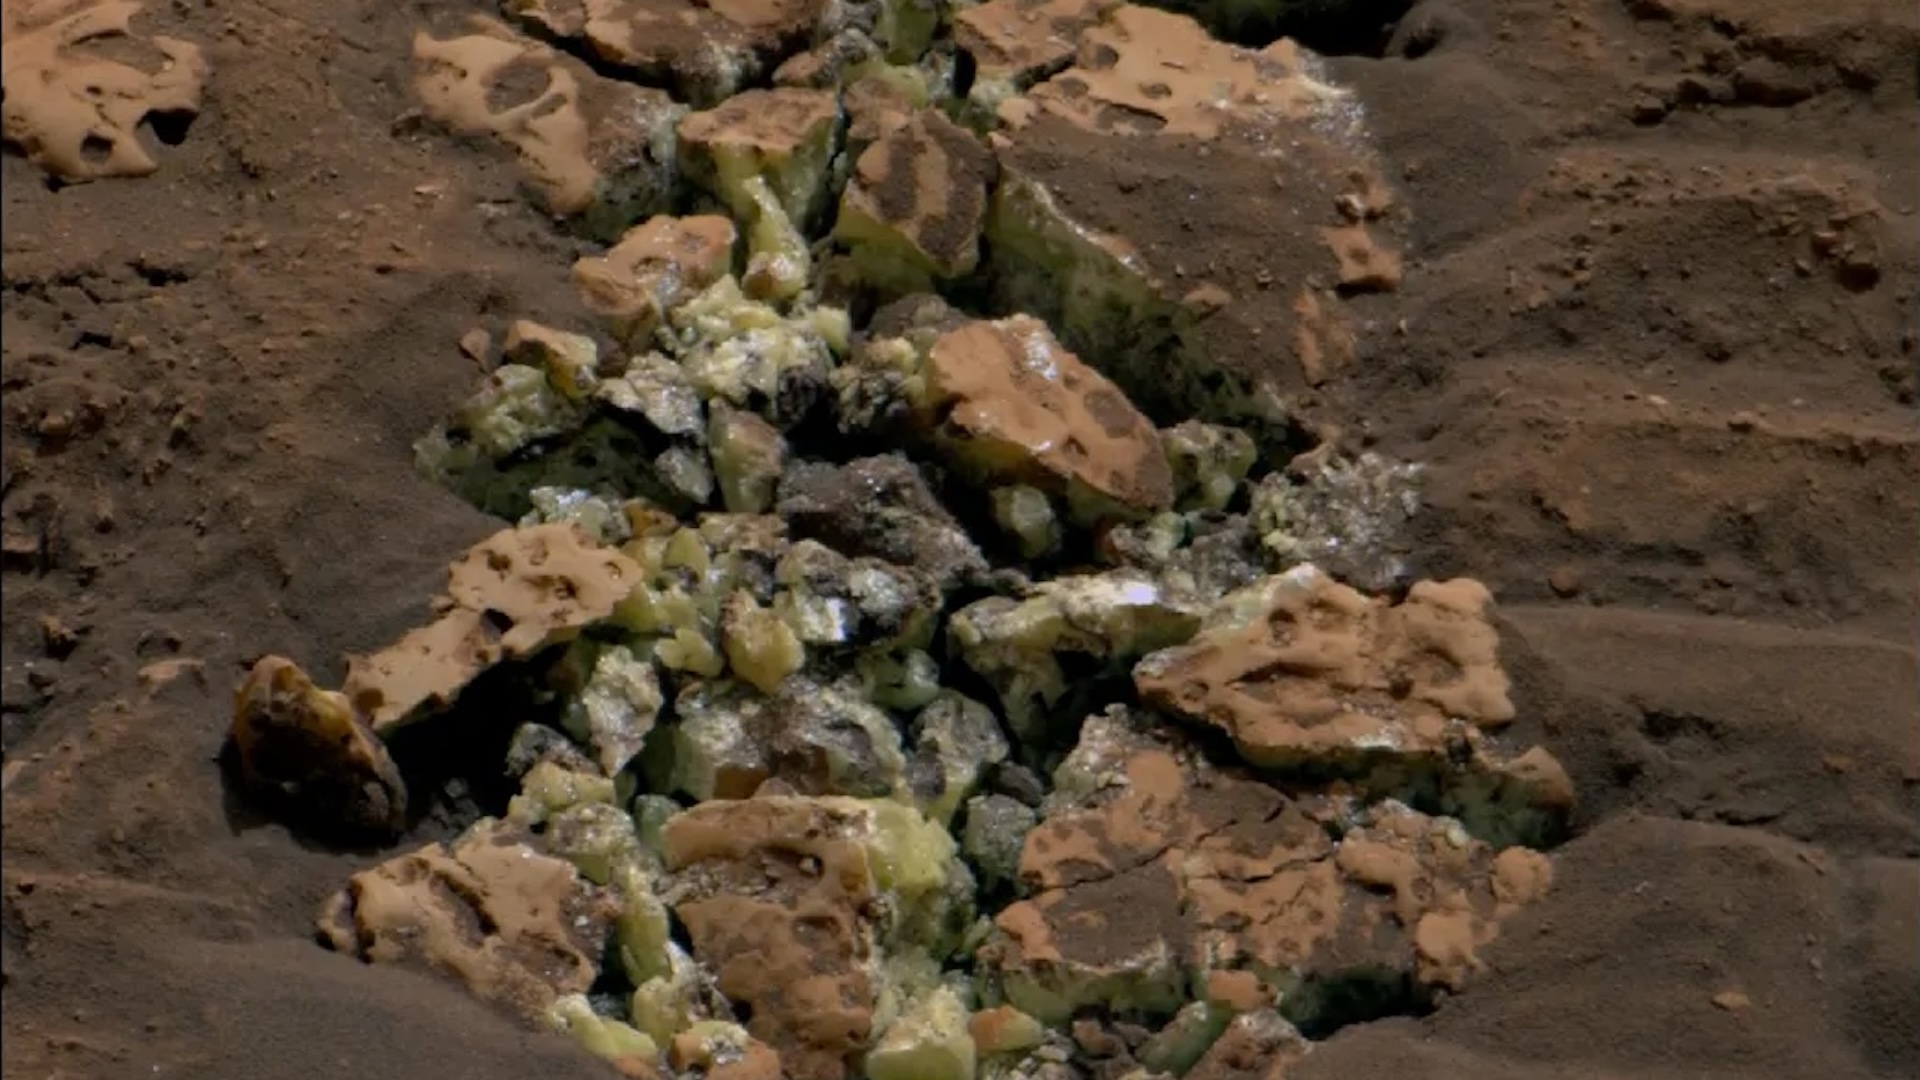  NASA's Curiosity rover accidentally reveals ultra-rare sulfur crystals after crushing a rock on Mars 